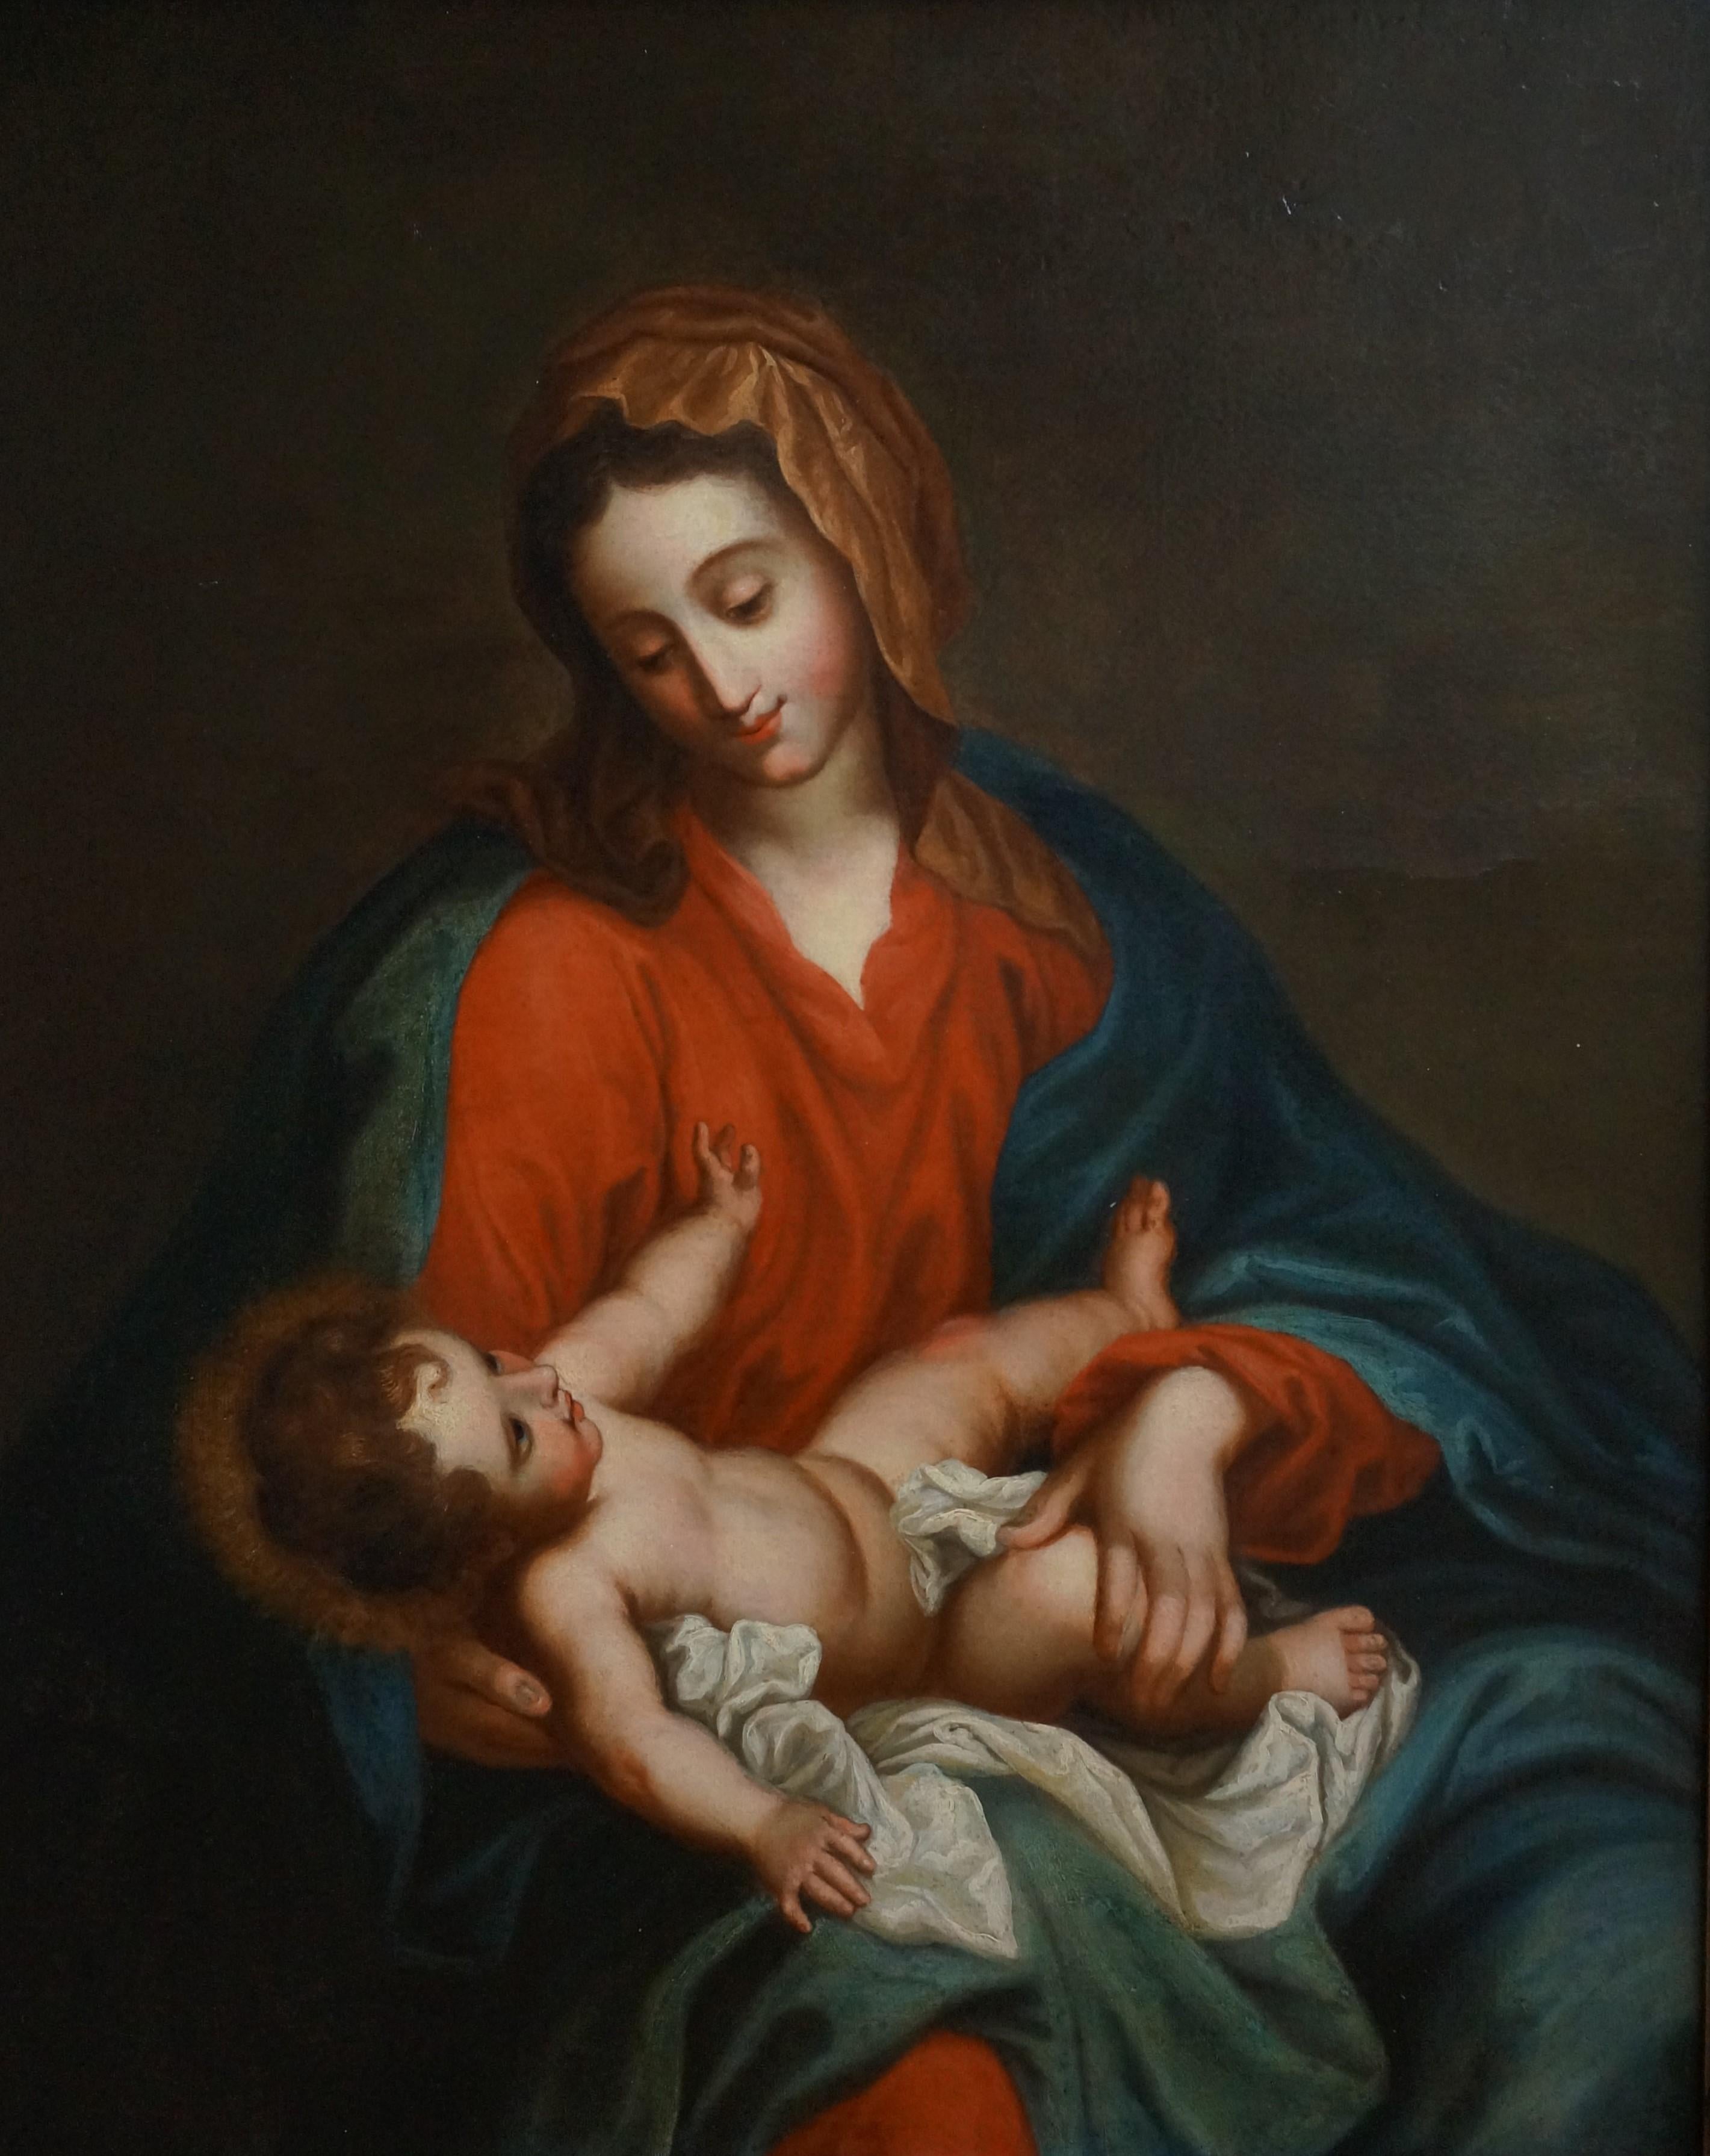 Unknown Figurative Painting - Madonna and child, Italian school, 18th century